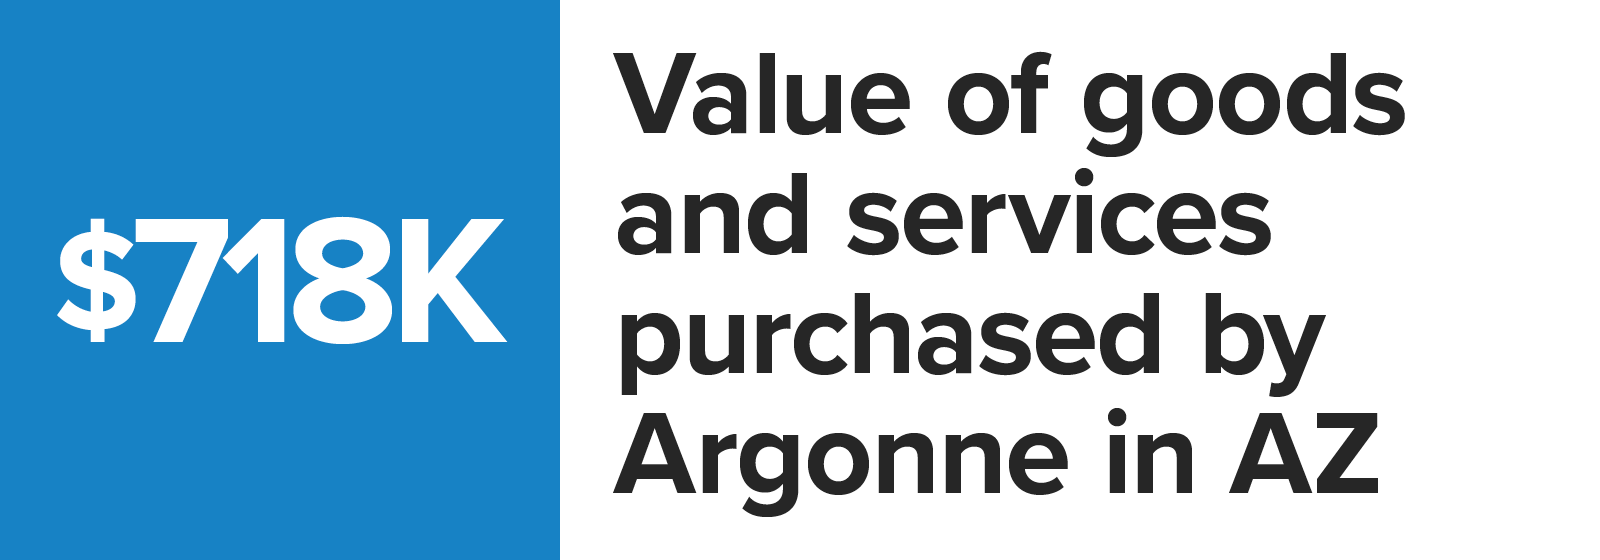 Number graphic value of goods and services purchased by Argonne in Arizona